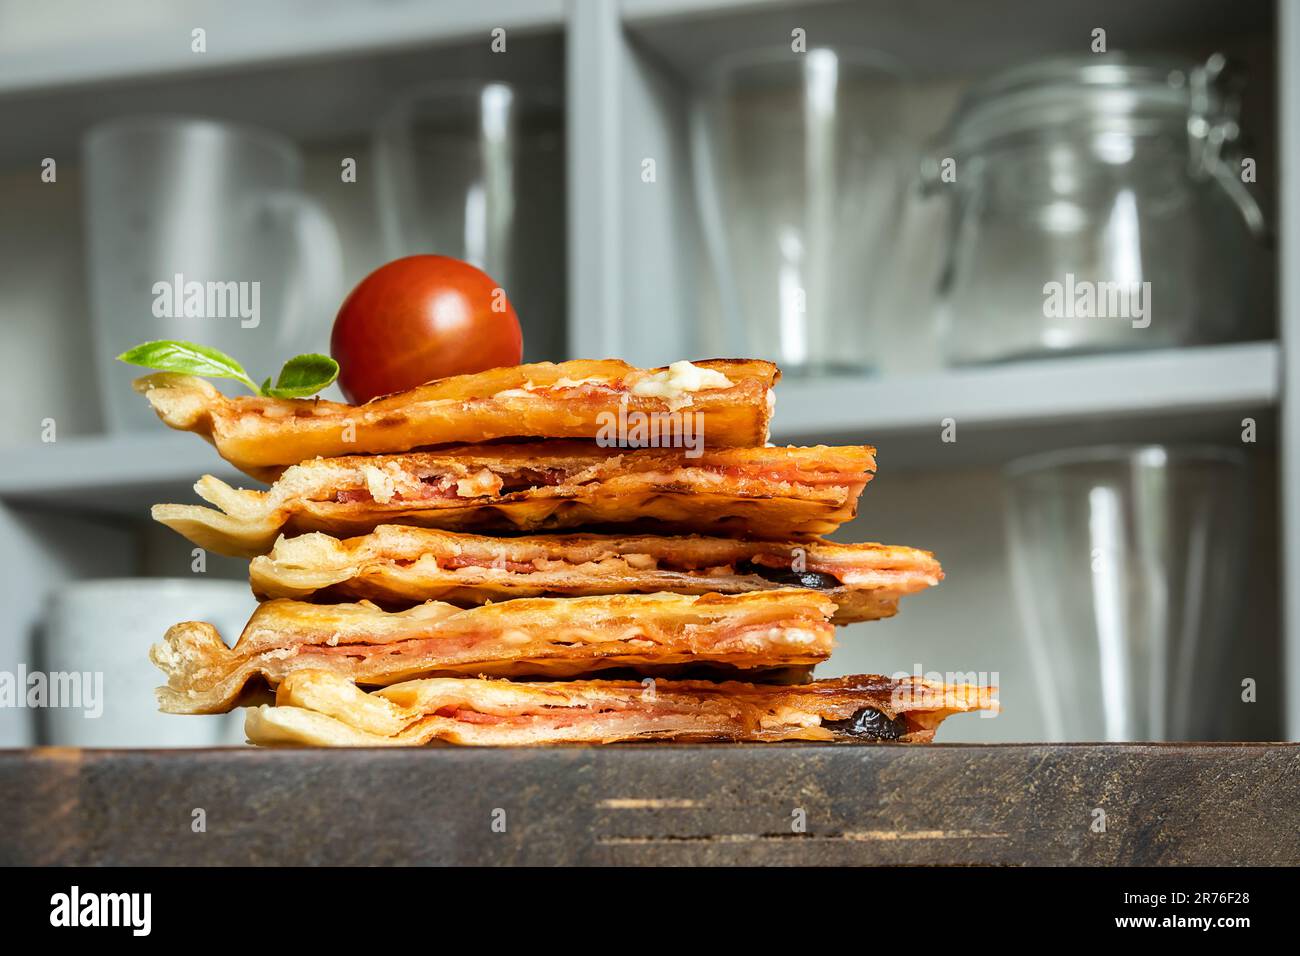 Homemade pizza waffle with tomato sauce, pepperoni, olives and parmesan cheese on a cutting board on the kitchen table Stock Photo